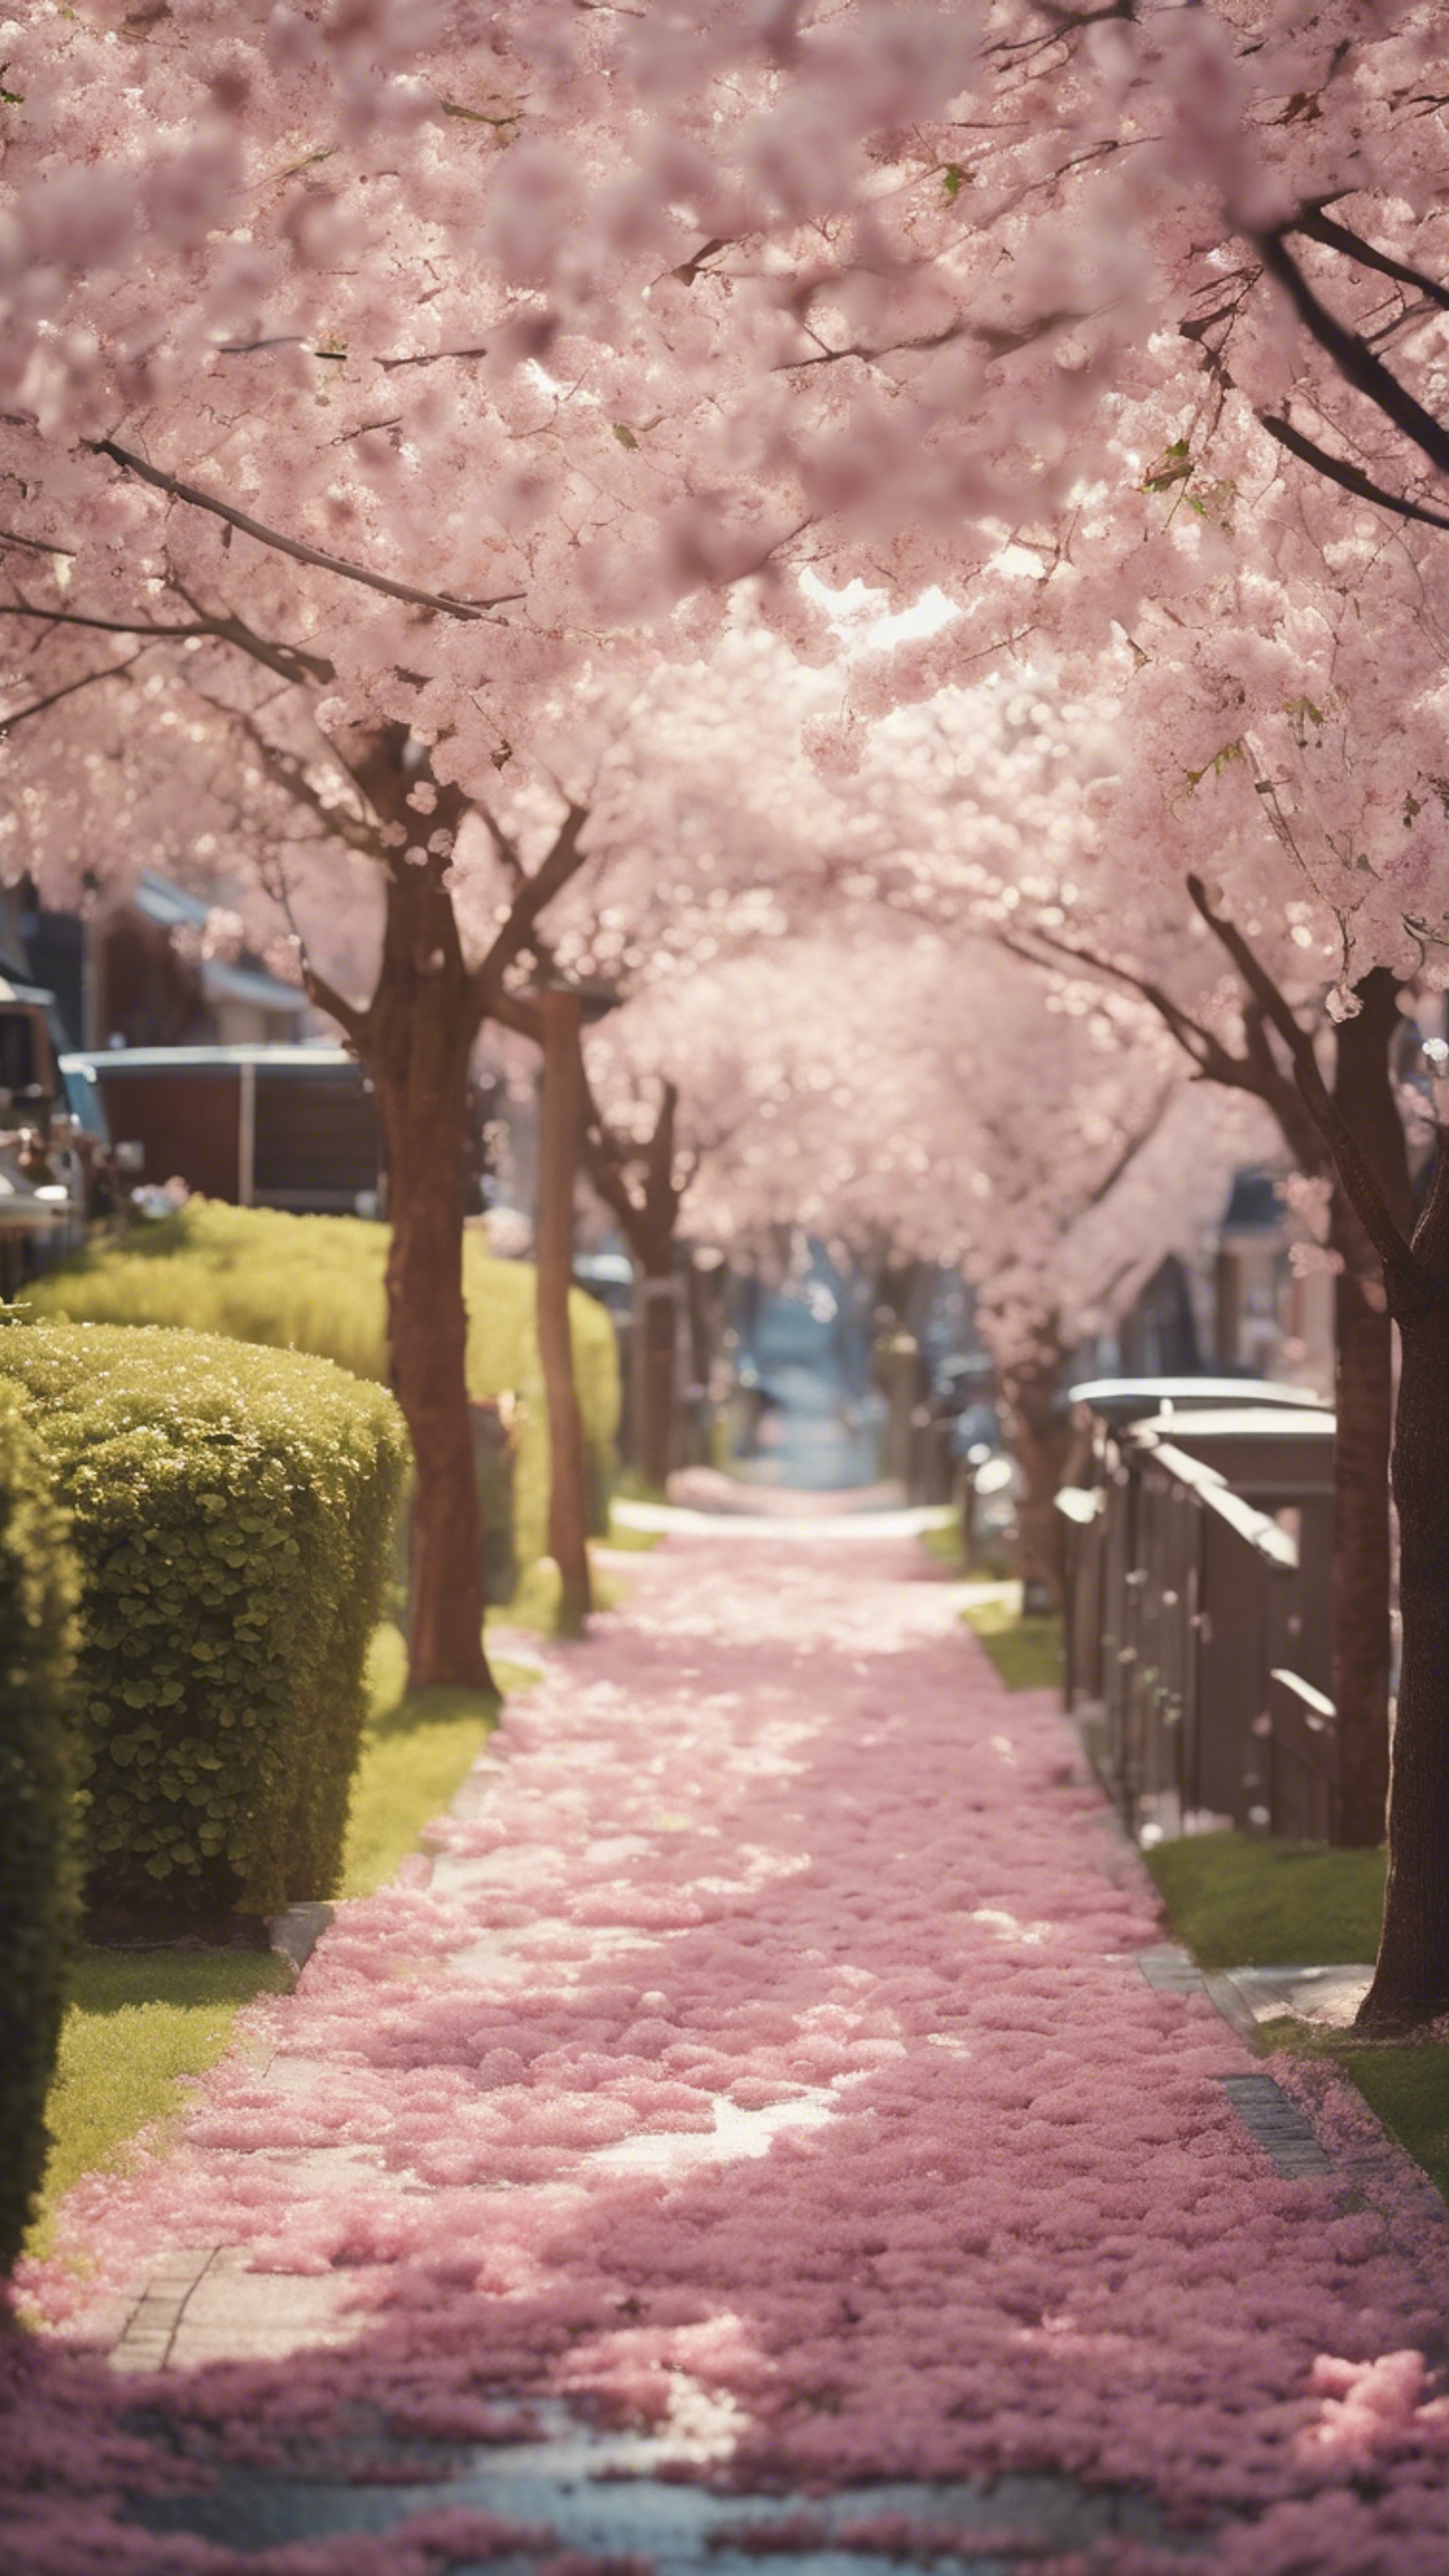 A suburban street lined with houses, and cherry blossom trees showering the pathway with petals, giving an ethereal feel to a sunny spring morning. ផ្ទាំង​រូបភាព[d085be0bf6ea43718843]